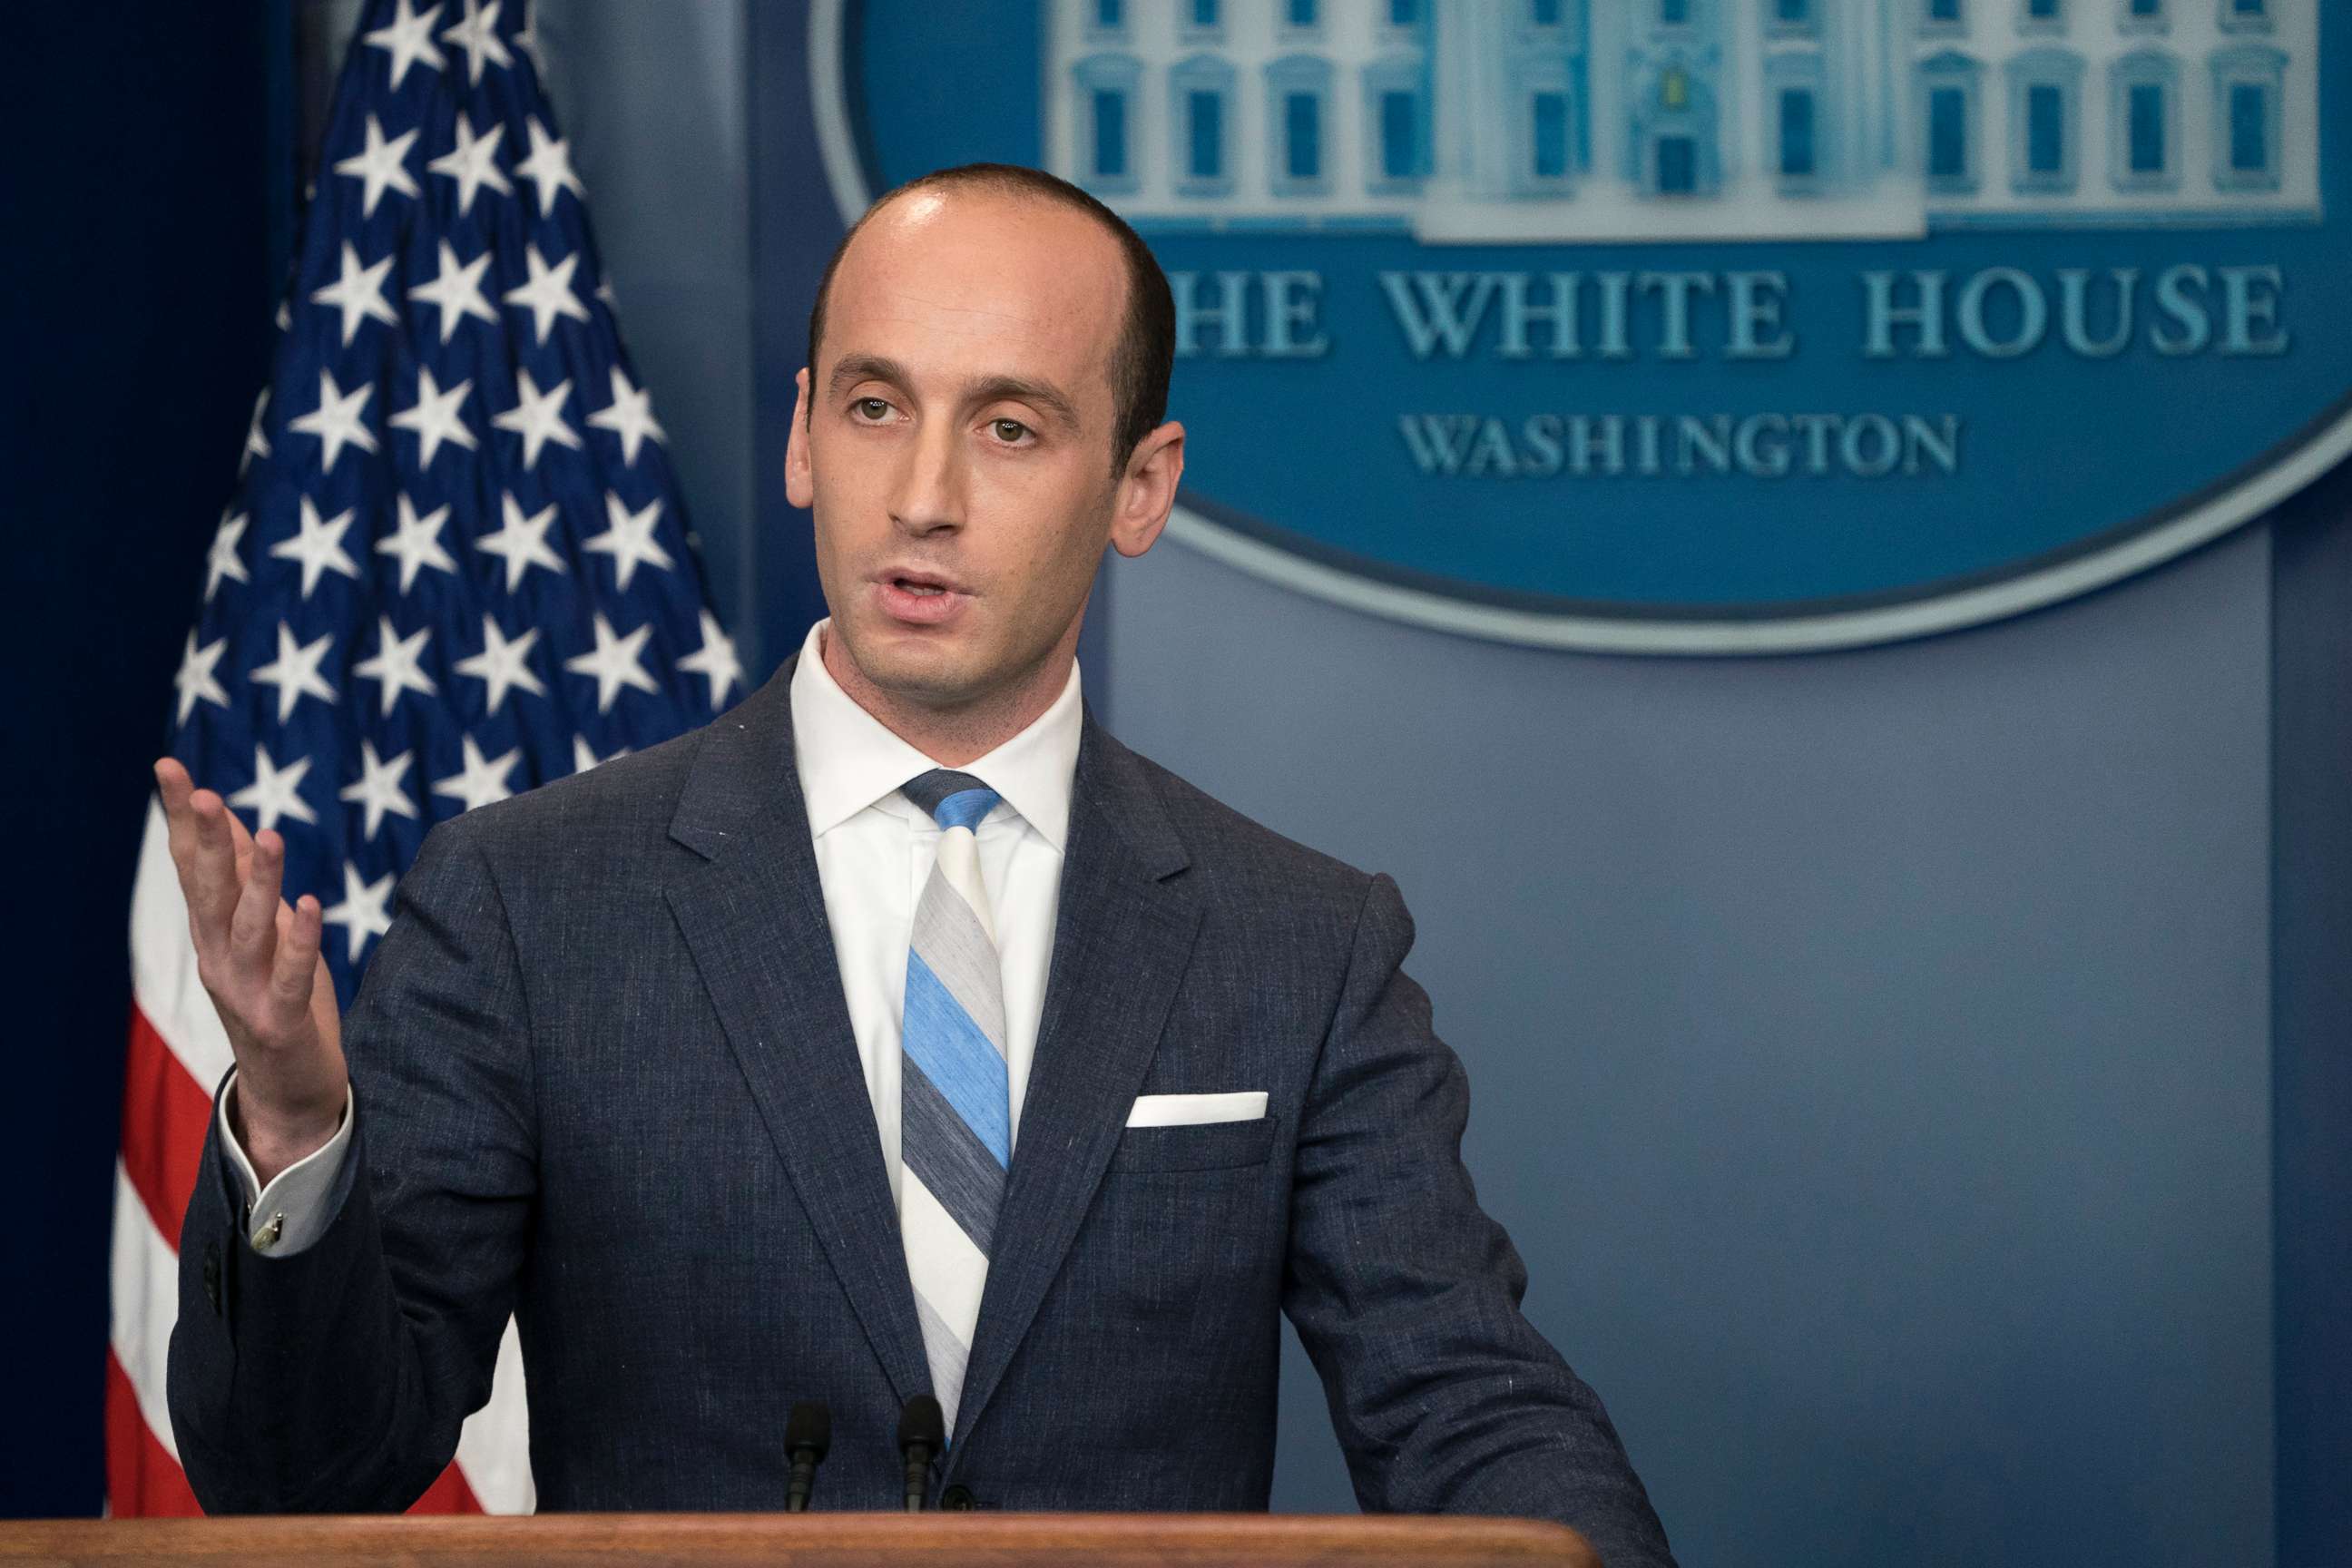 PHOTO: Senior Advisor for Policy to President Trump Stephen Miller responds to questions on the Trump administration's immigration policy announced today during the daily press briefing at the White House in Washington, D.C., Aug. 2, 2017.  